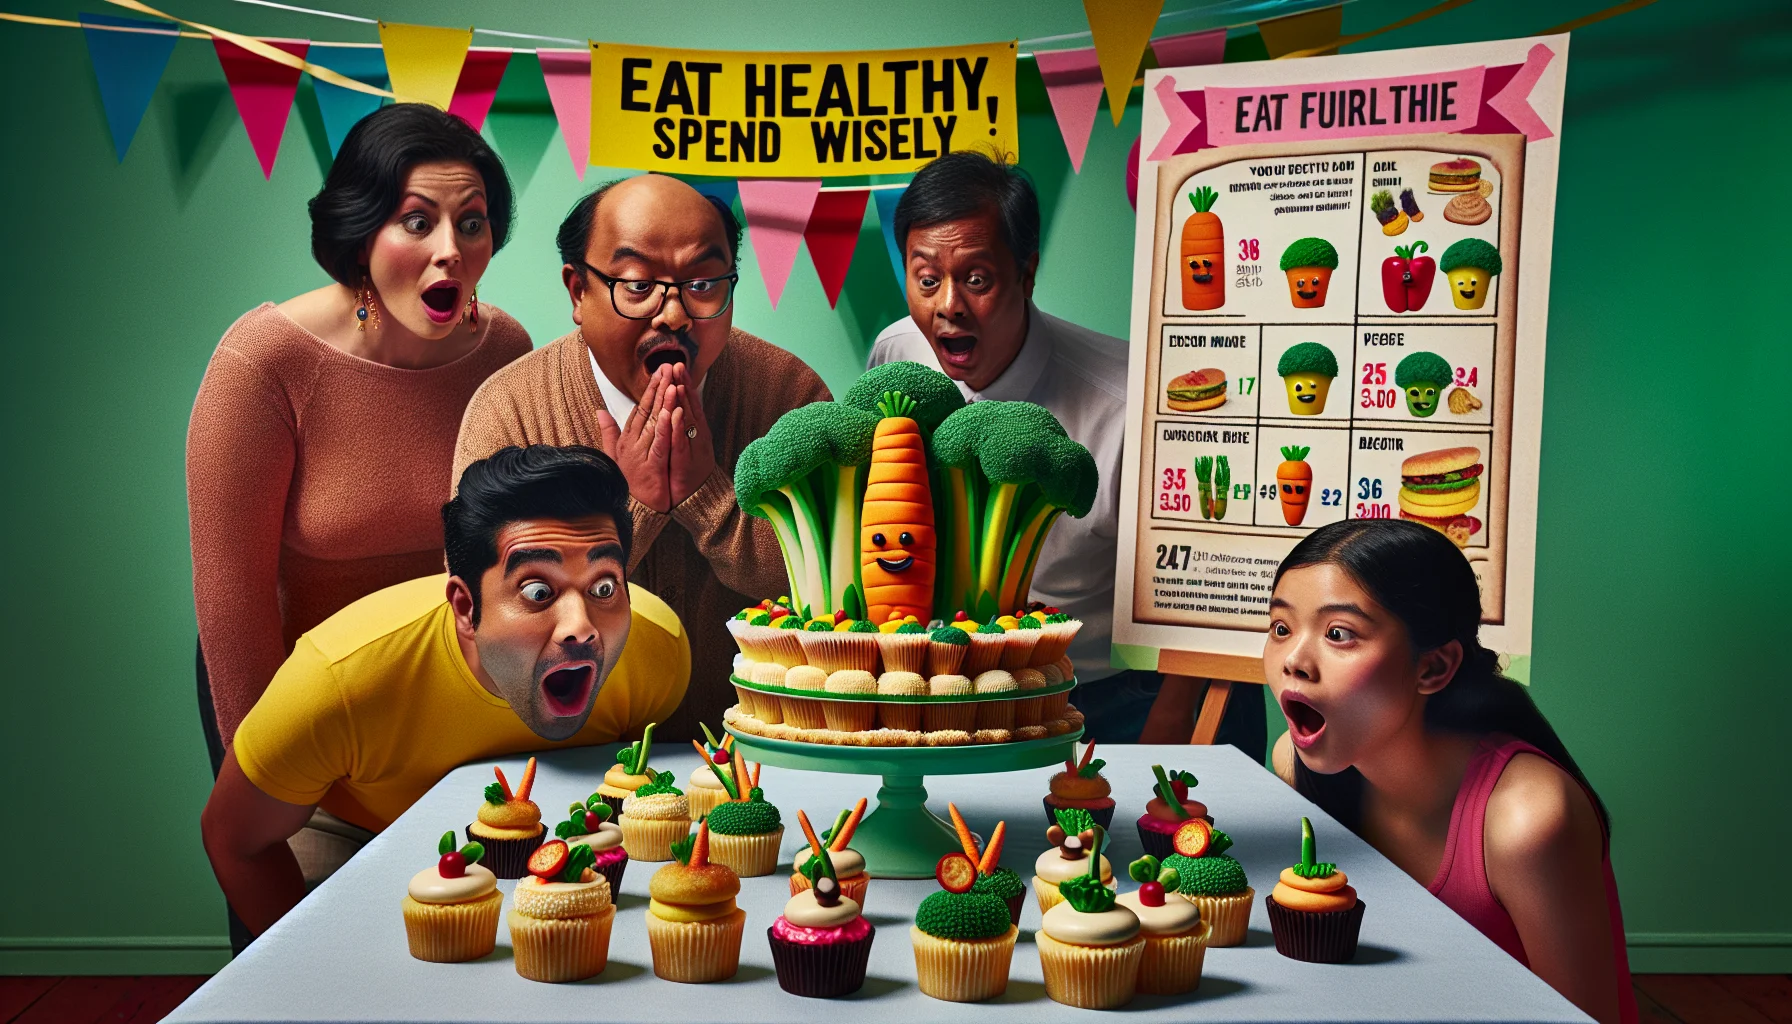 Create a humorous and enticing scene in a birthday party setting. The table is adorned with quirky vegetable-themed cupcakes designed to resemble a broccoli, a carrot and a bell pepper. There's a colorful banner overhead with the words 'Eat Healthy, Spend Wisely' and a group of people, including a South Asian man, a Hispanic woman and a Black child, all staring in amazement at the cupcakes. Their expressions are a mix of amusement and disbelief. In the background, there's a poster showcasing a before-and-after image of a traditional cupcake and a vegetable-themed one with a price comparison below.